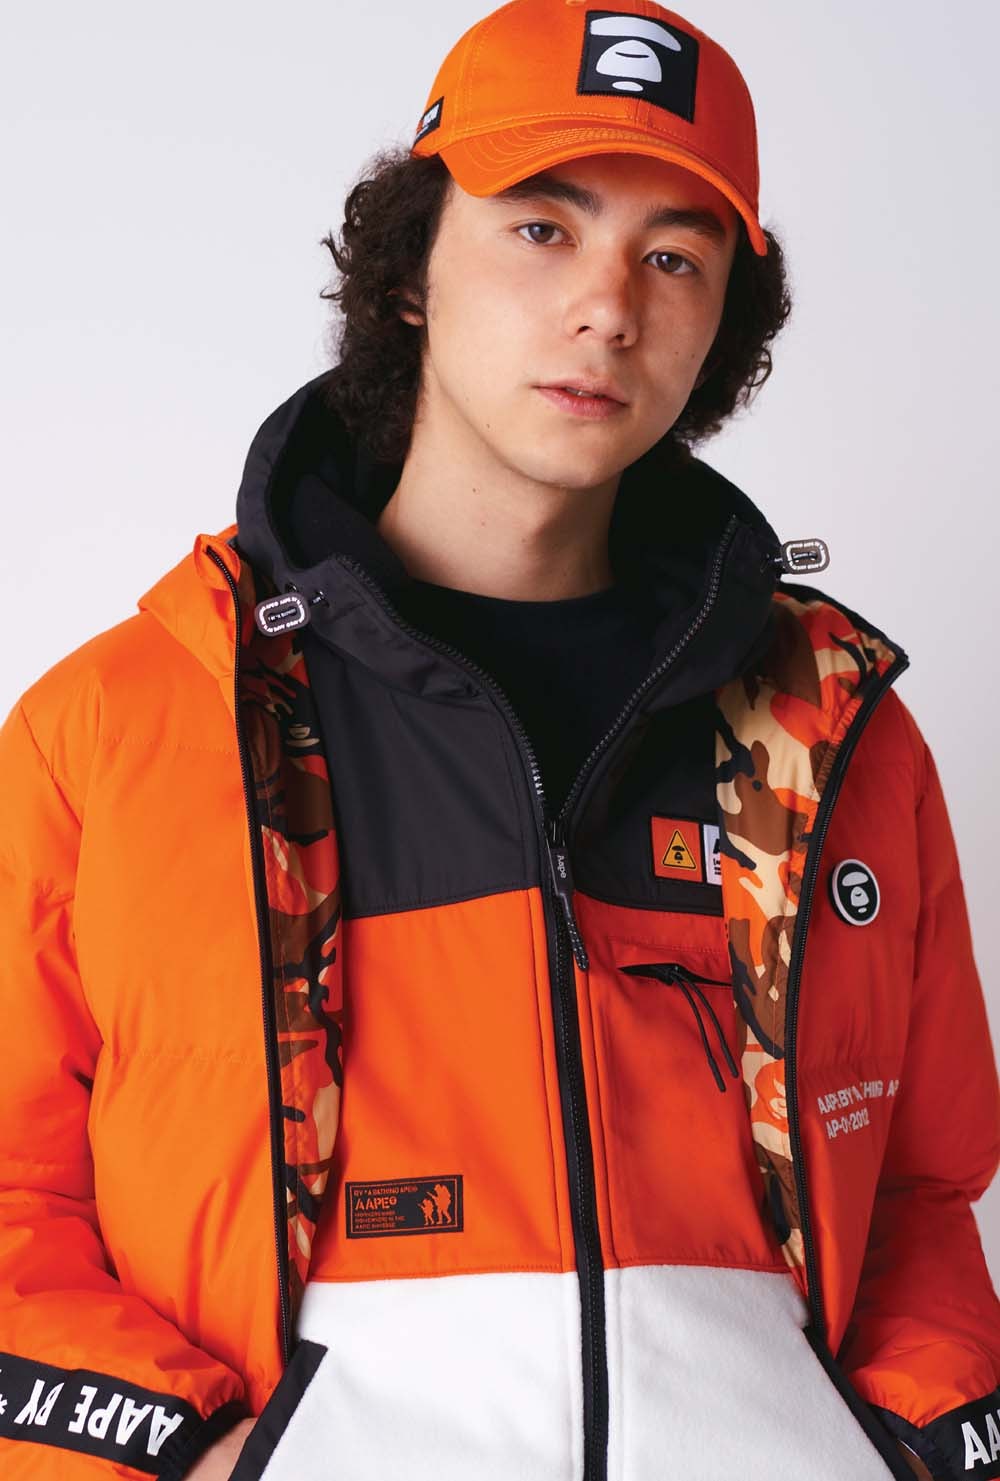 AAPE Winter 2019 Lookbook Jackets Hoodies Crewneck Sweatshirts Long sleeves Vests Pants Waist Bags Pouches Beanies Hats Yellow Green Black Orange Red Camouflage Checkered